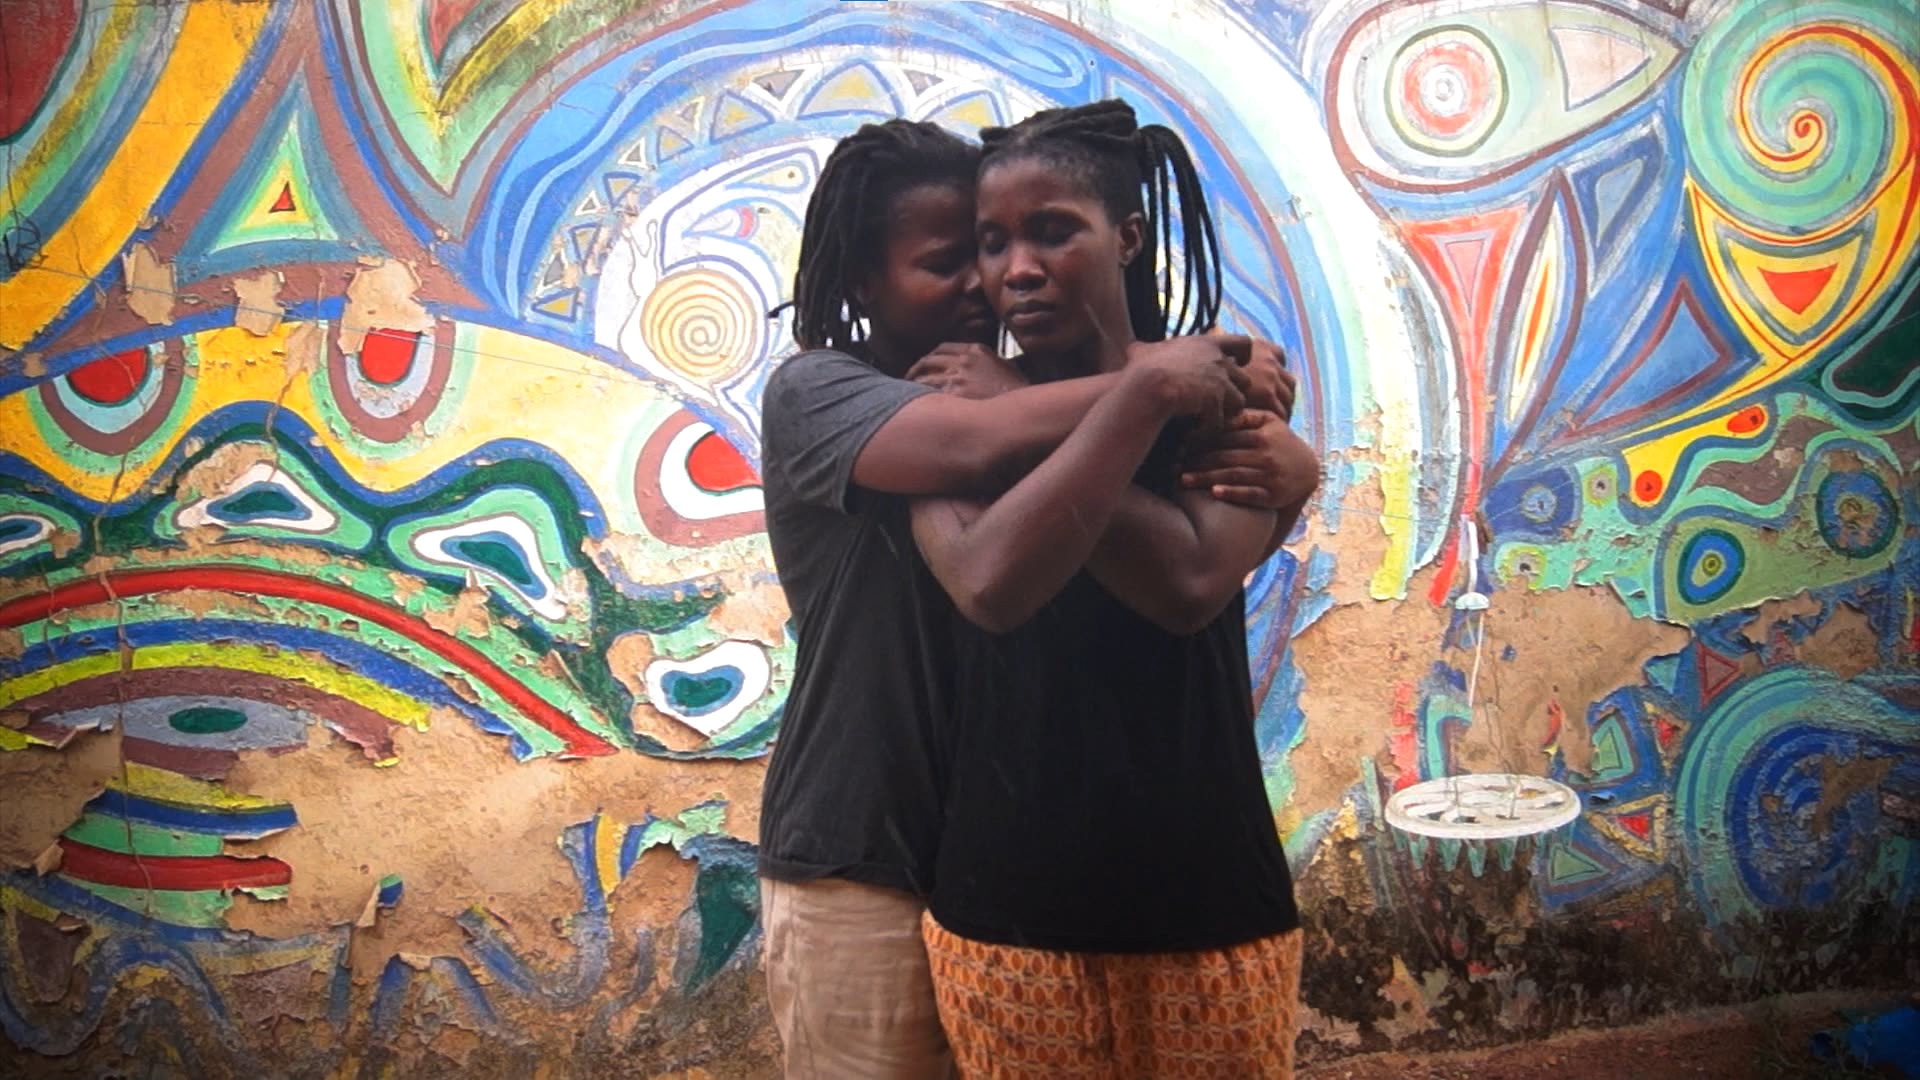 The Nameless Collective: Fostering queer artistic and cultural expression in Burkina Faso